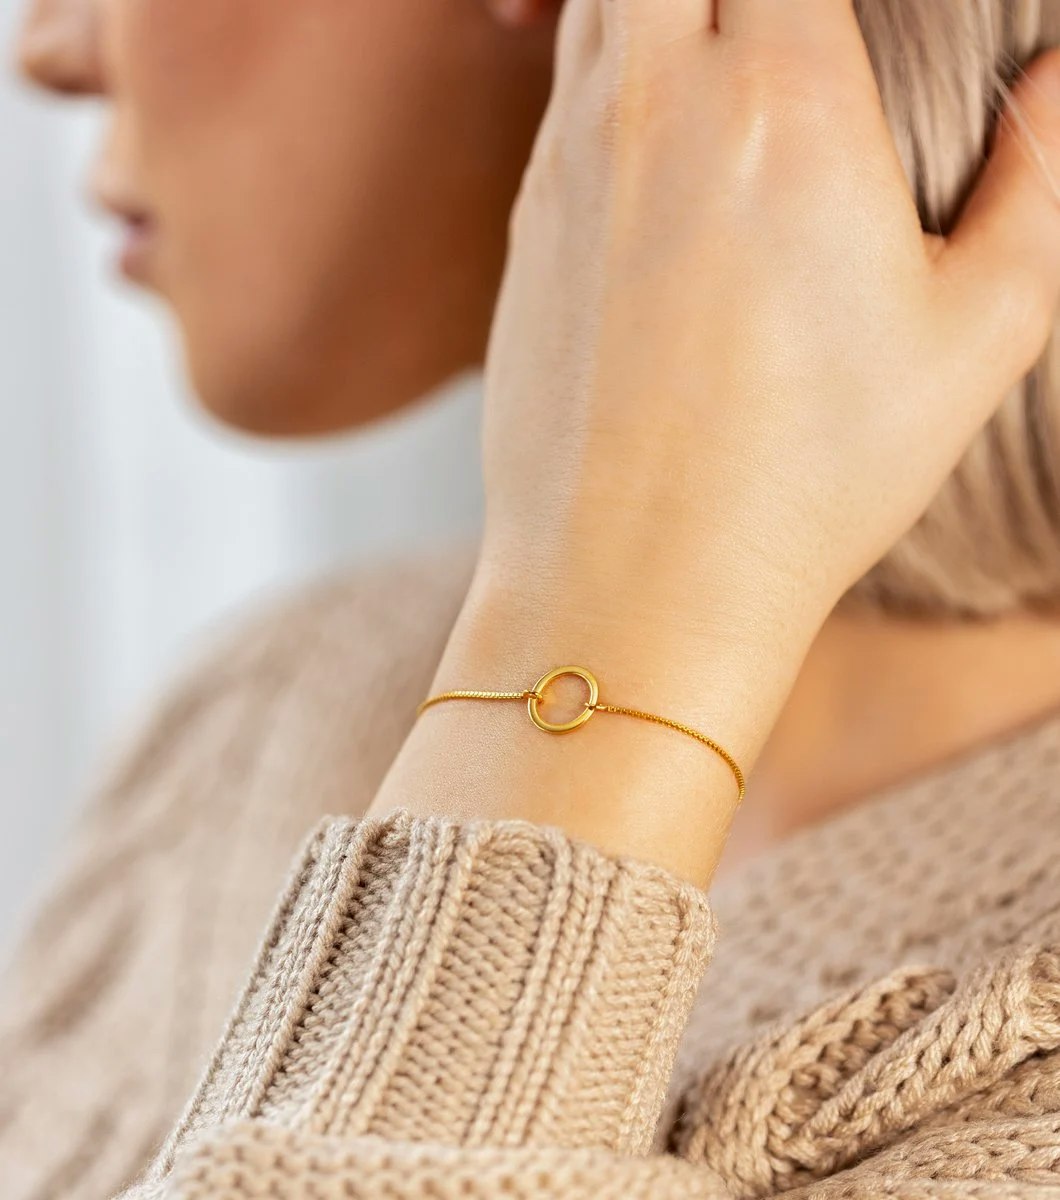 Minimalistica Ring Bracelet Guld Syster P